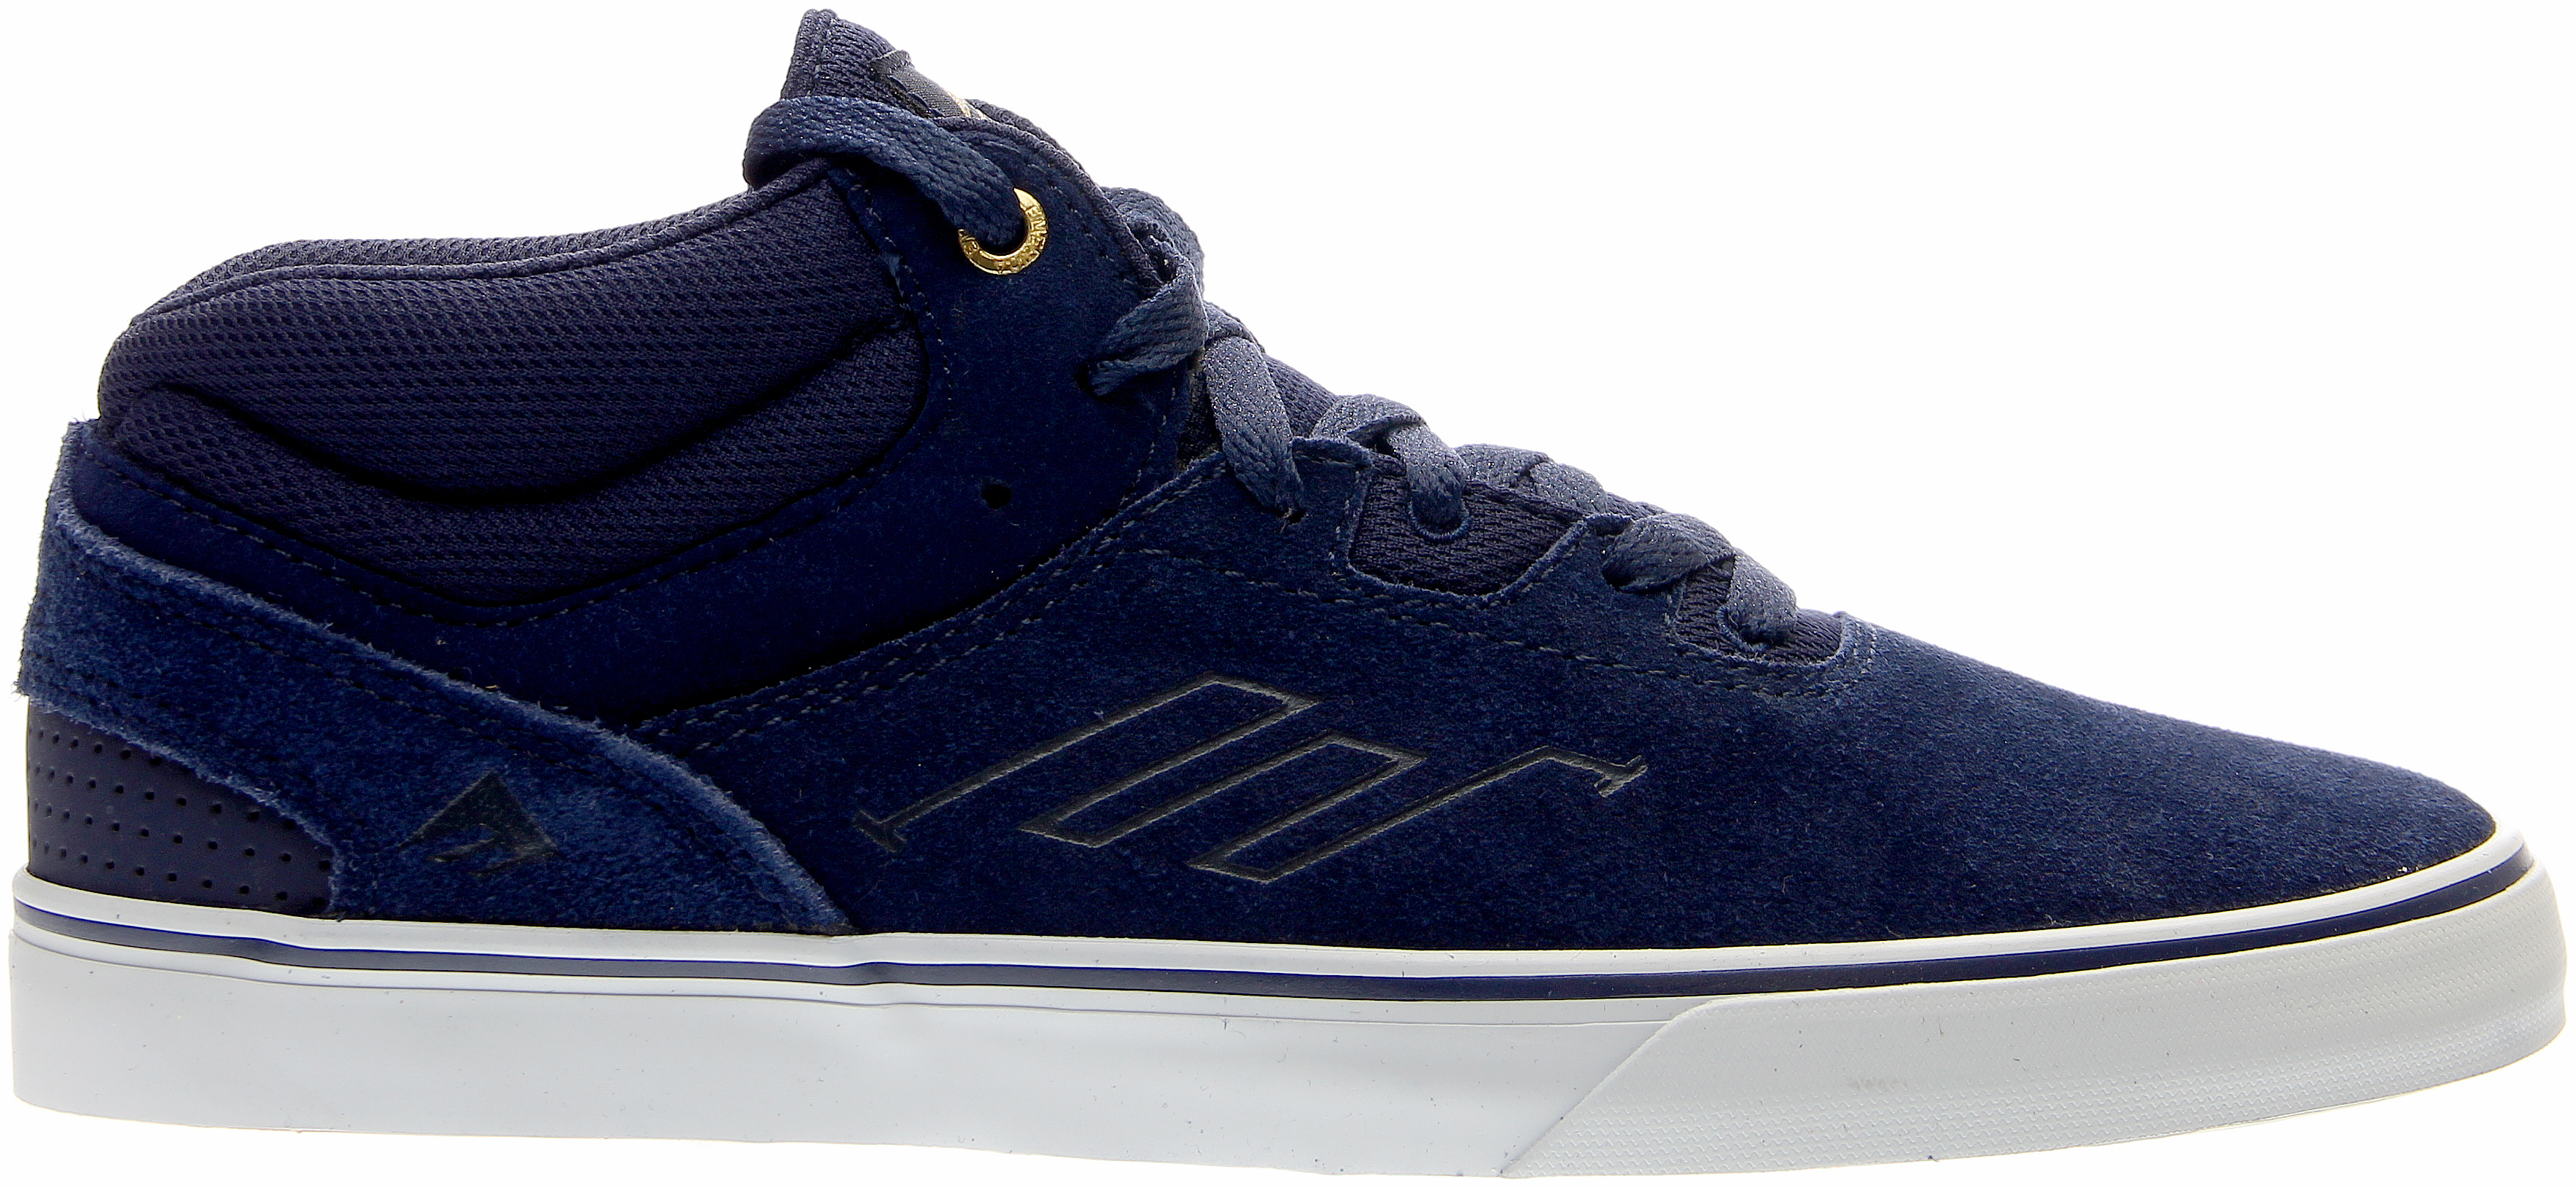 New Emerica Westgate Mid Vulc Shoes